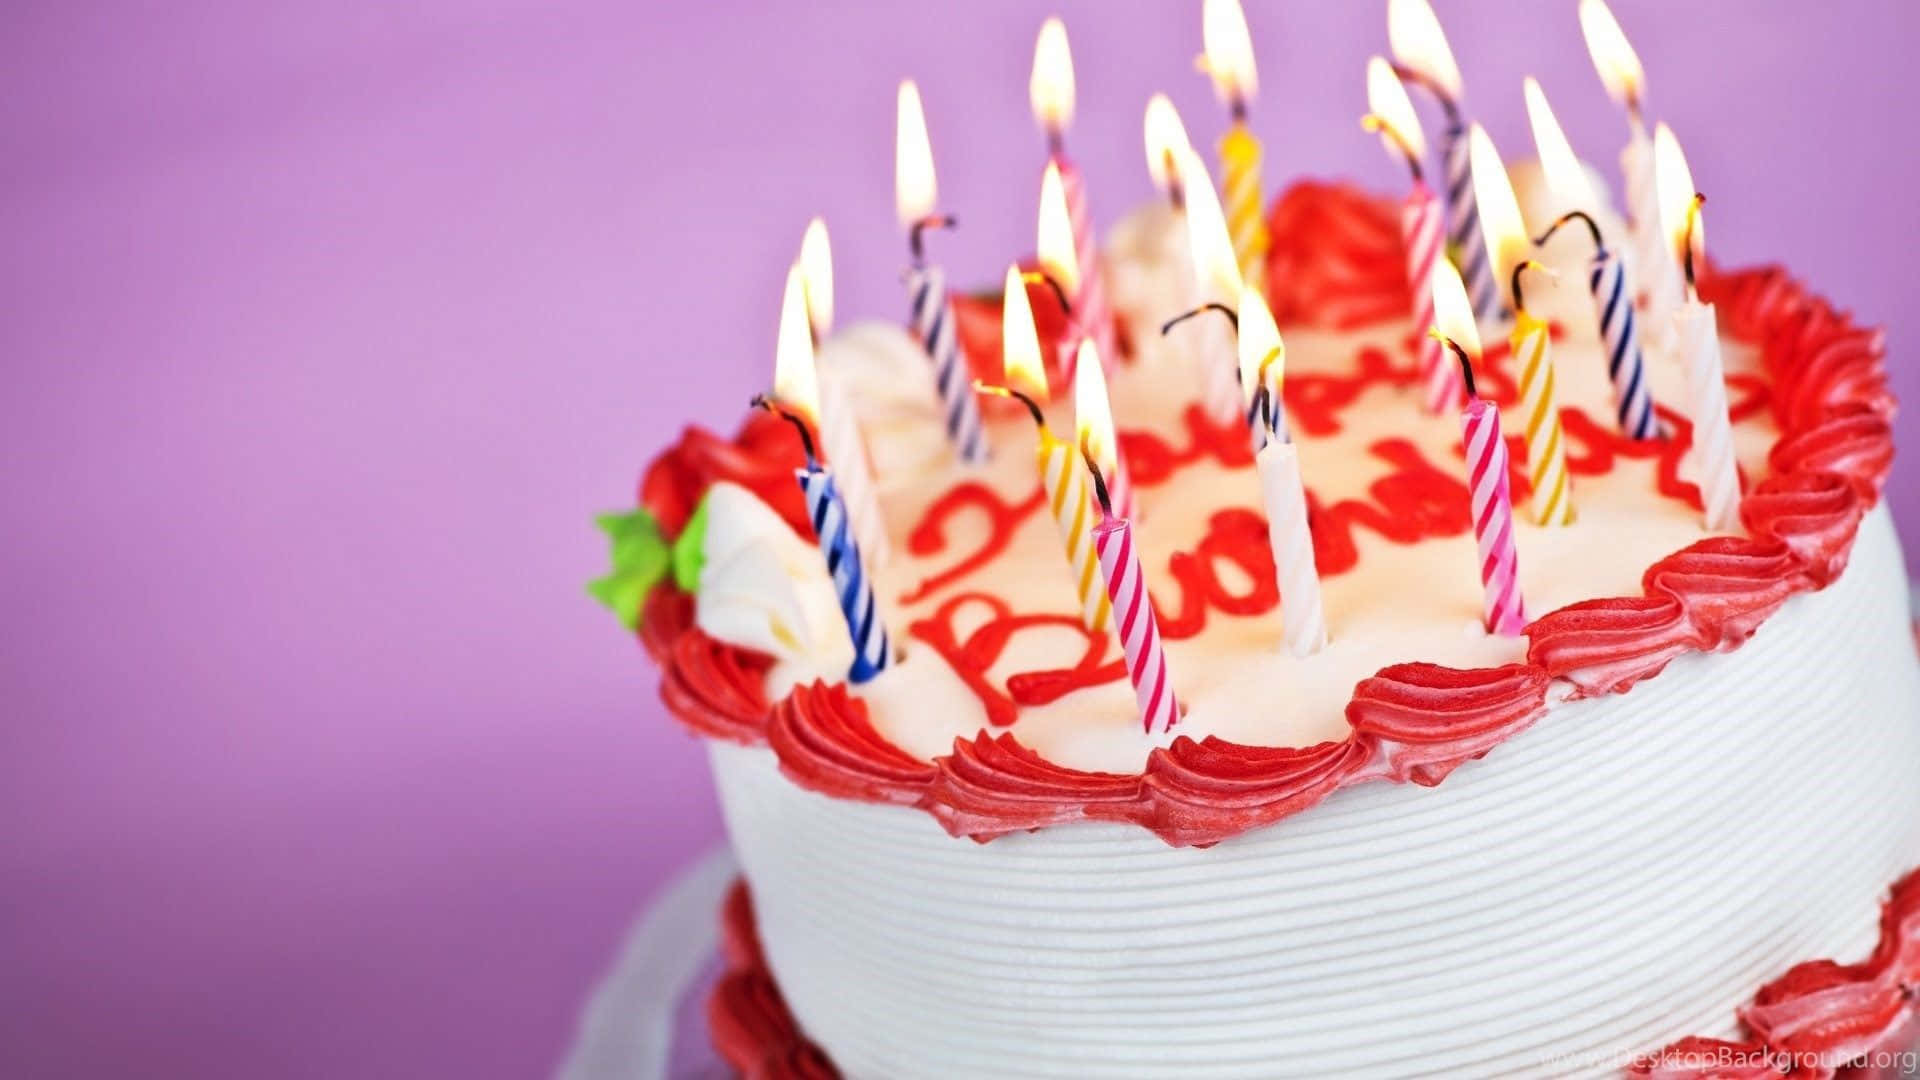 Red And White Birthday Cake With Candles Background